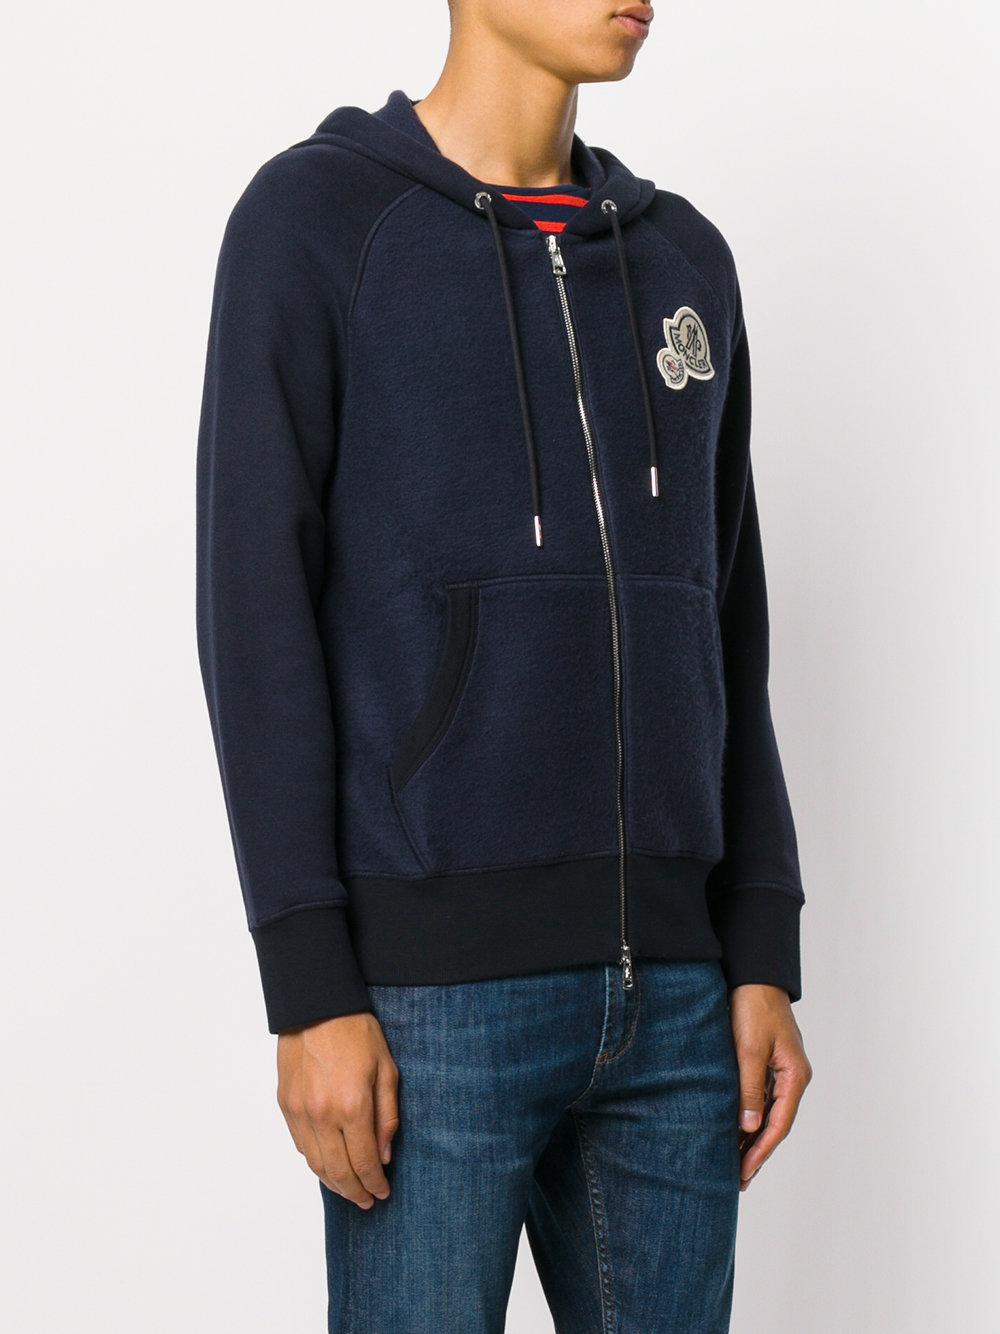 Moncler Double Logo Hoodie in Blue for Men - Lyst